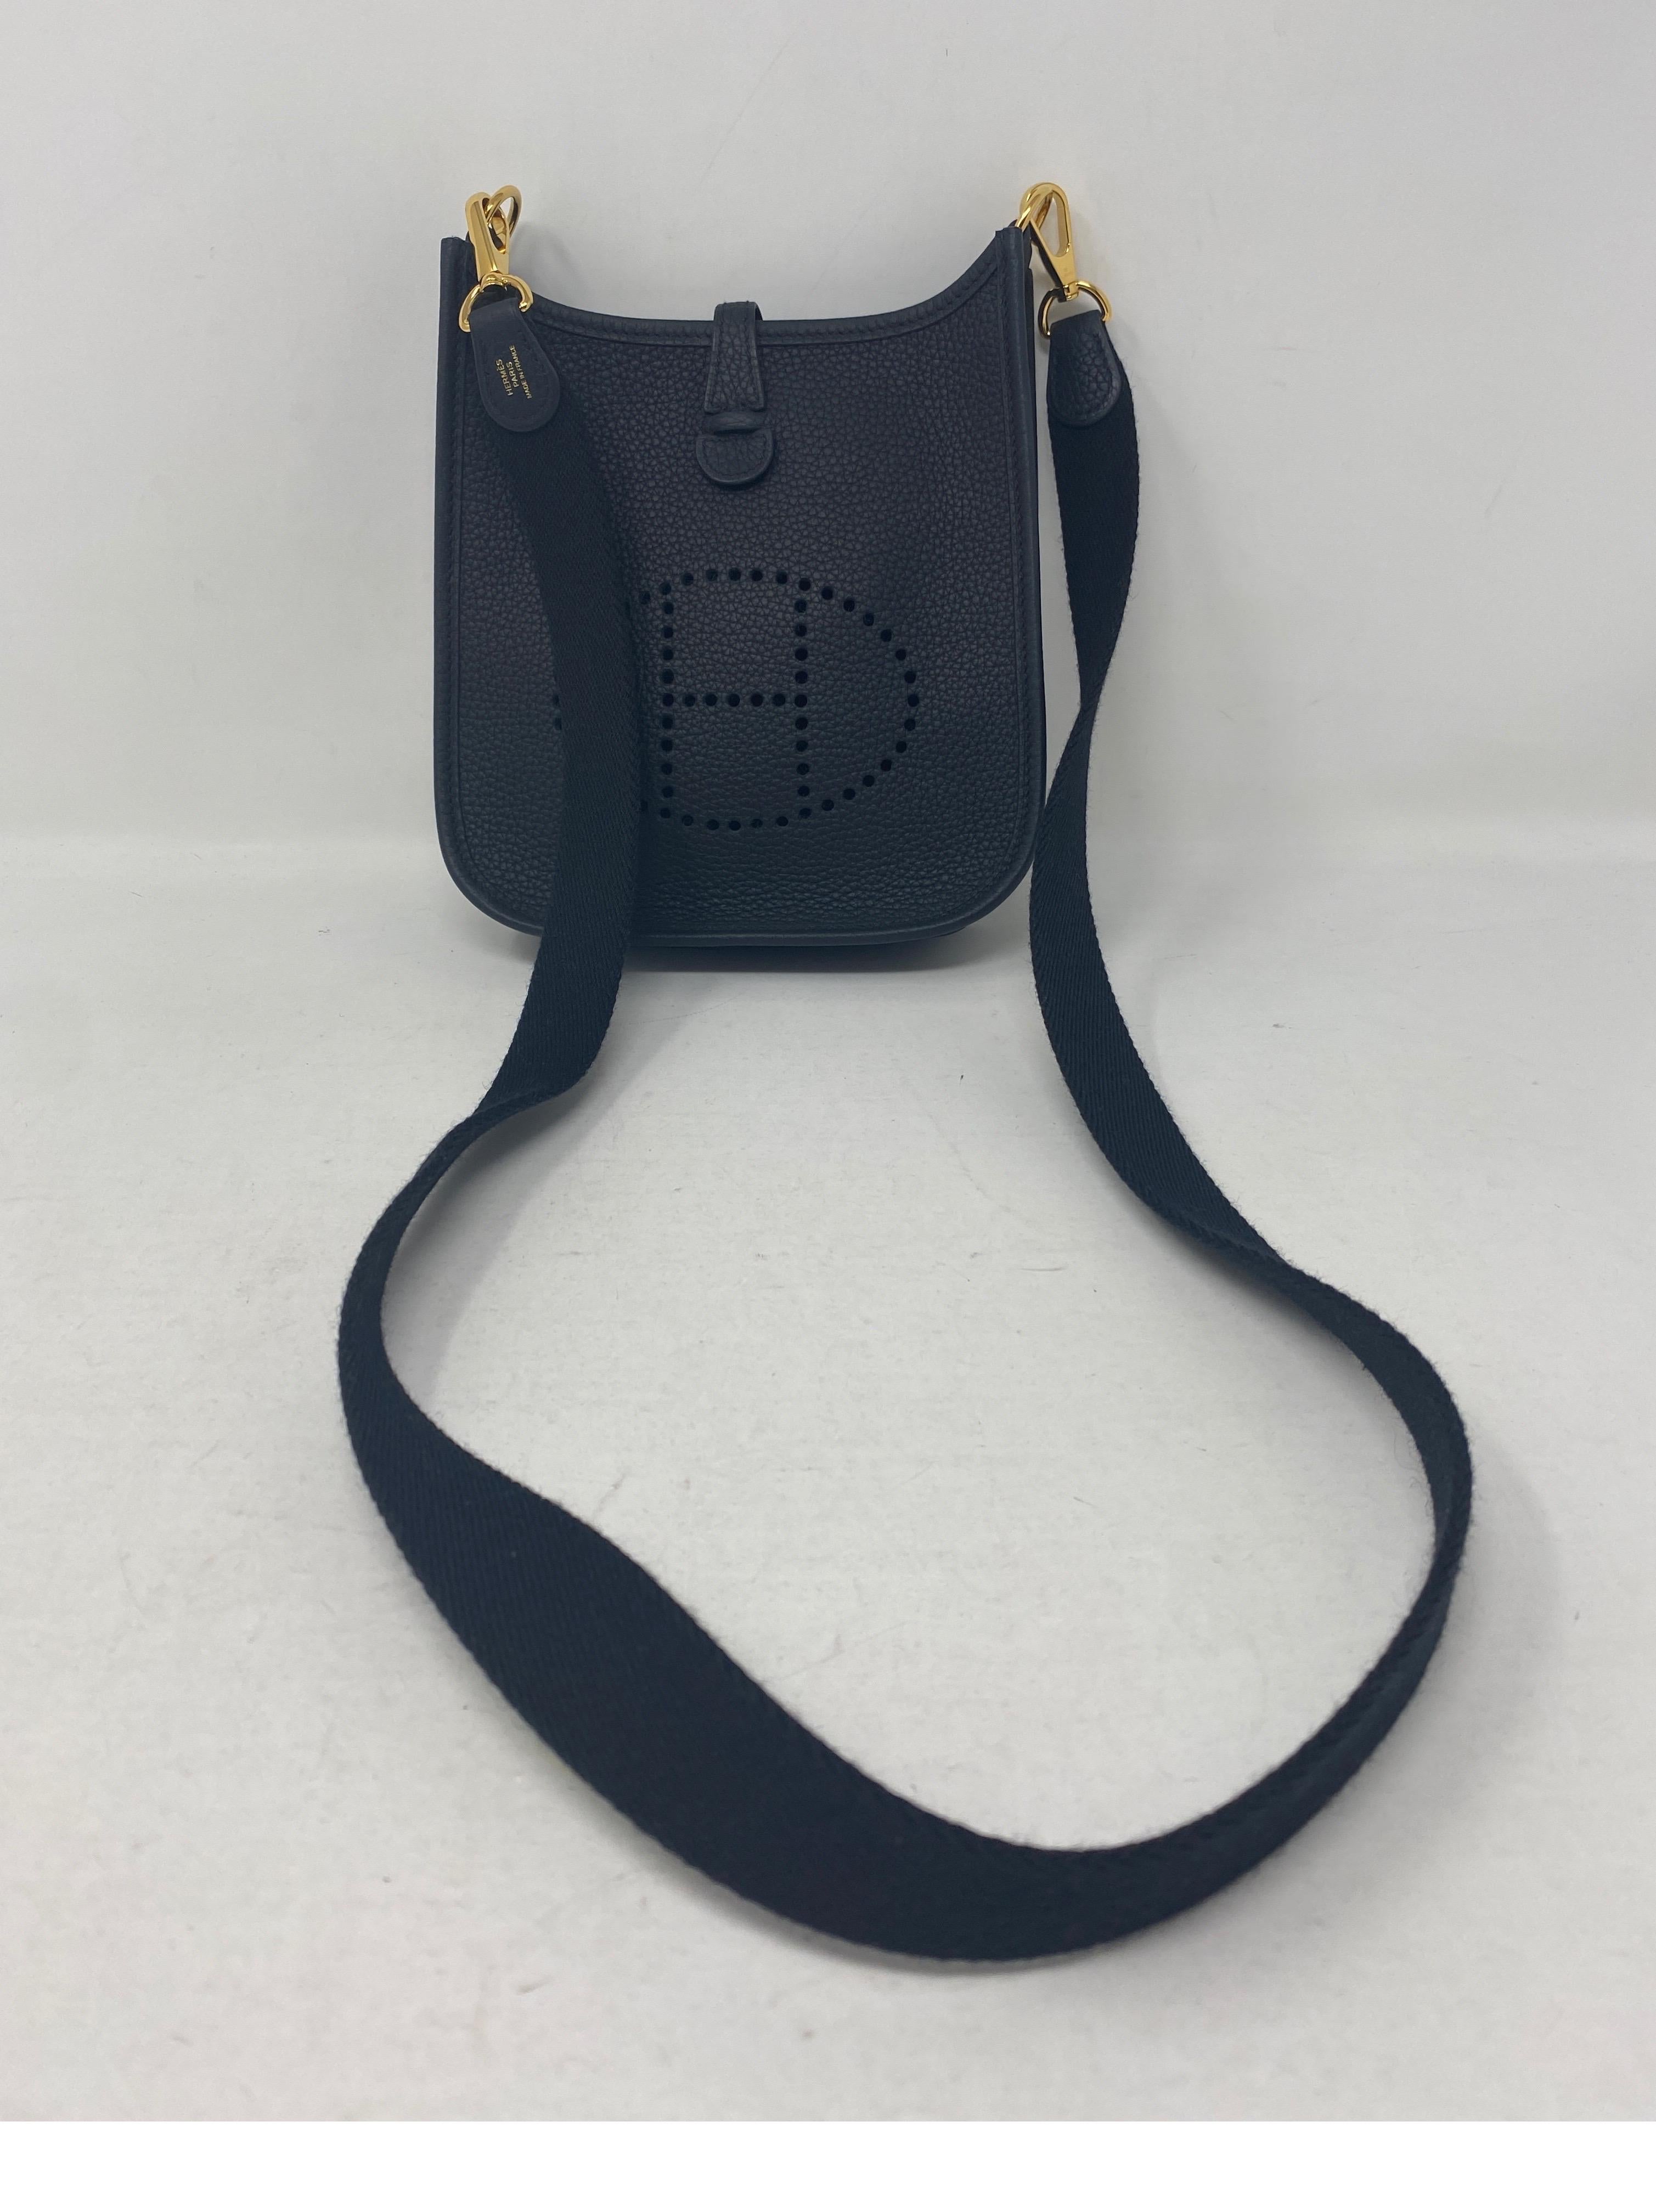 Hermes Evelyne TPM Black Bag. Gold hardware. Mint like new condition. Hard to get mini size. Most wanted black and gold combo. Complete set with dust cover and box. Guaranteed authentic.  